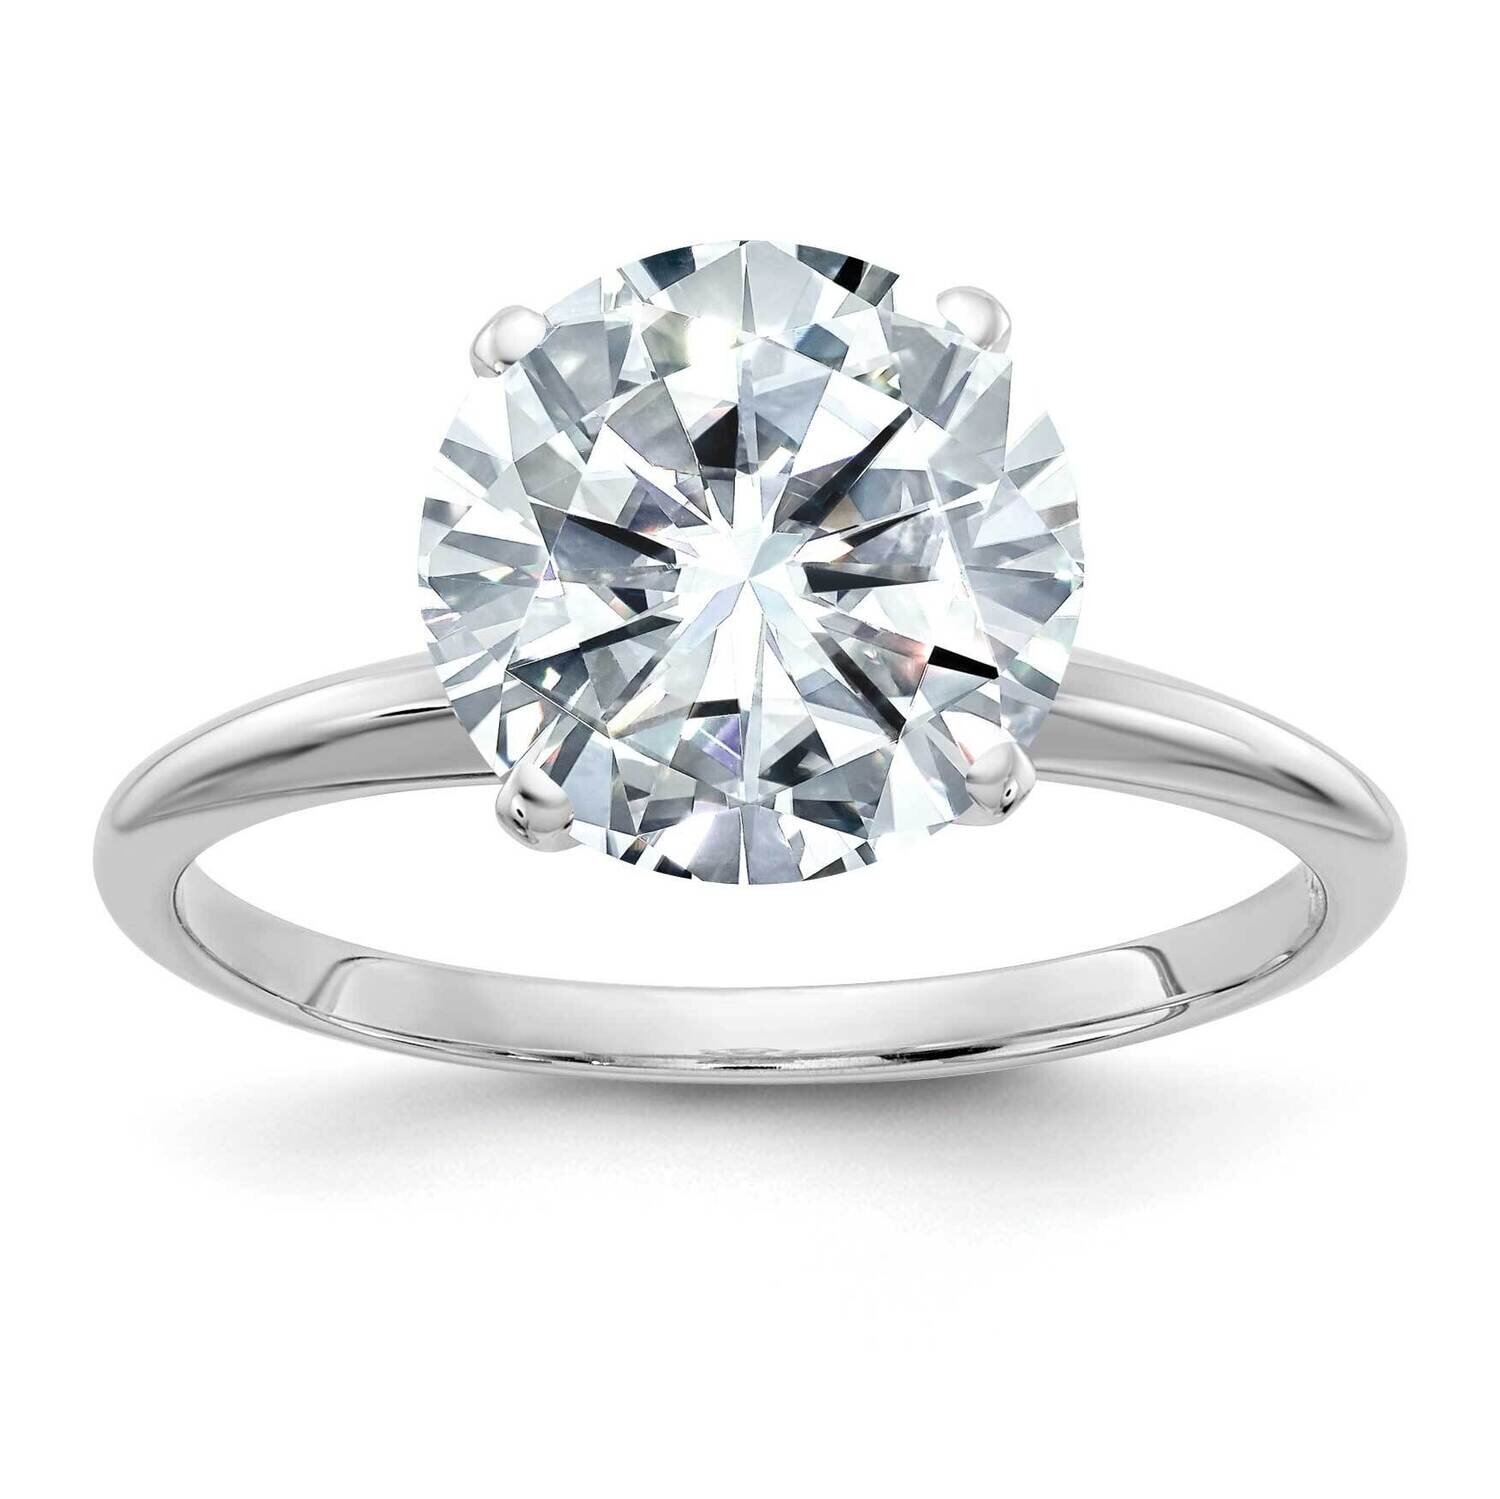 3ct. D E F Pure Light Round Moissanite Solitaire Ring 14k White Gold WGSH15-17MP-8